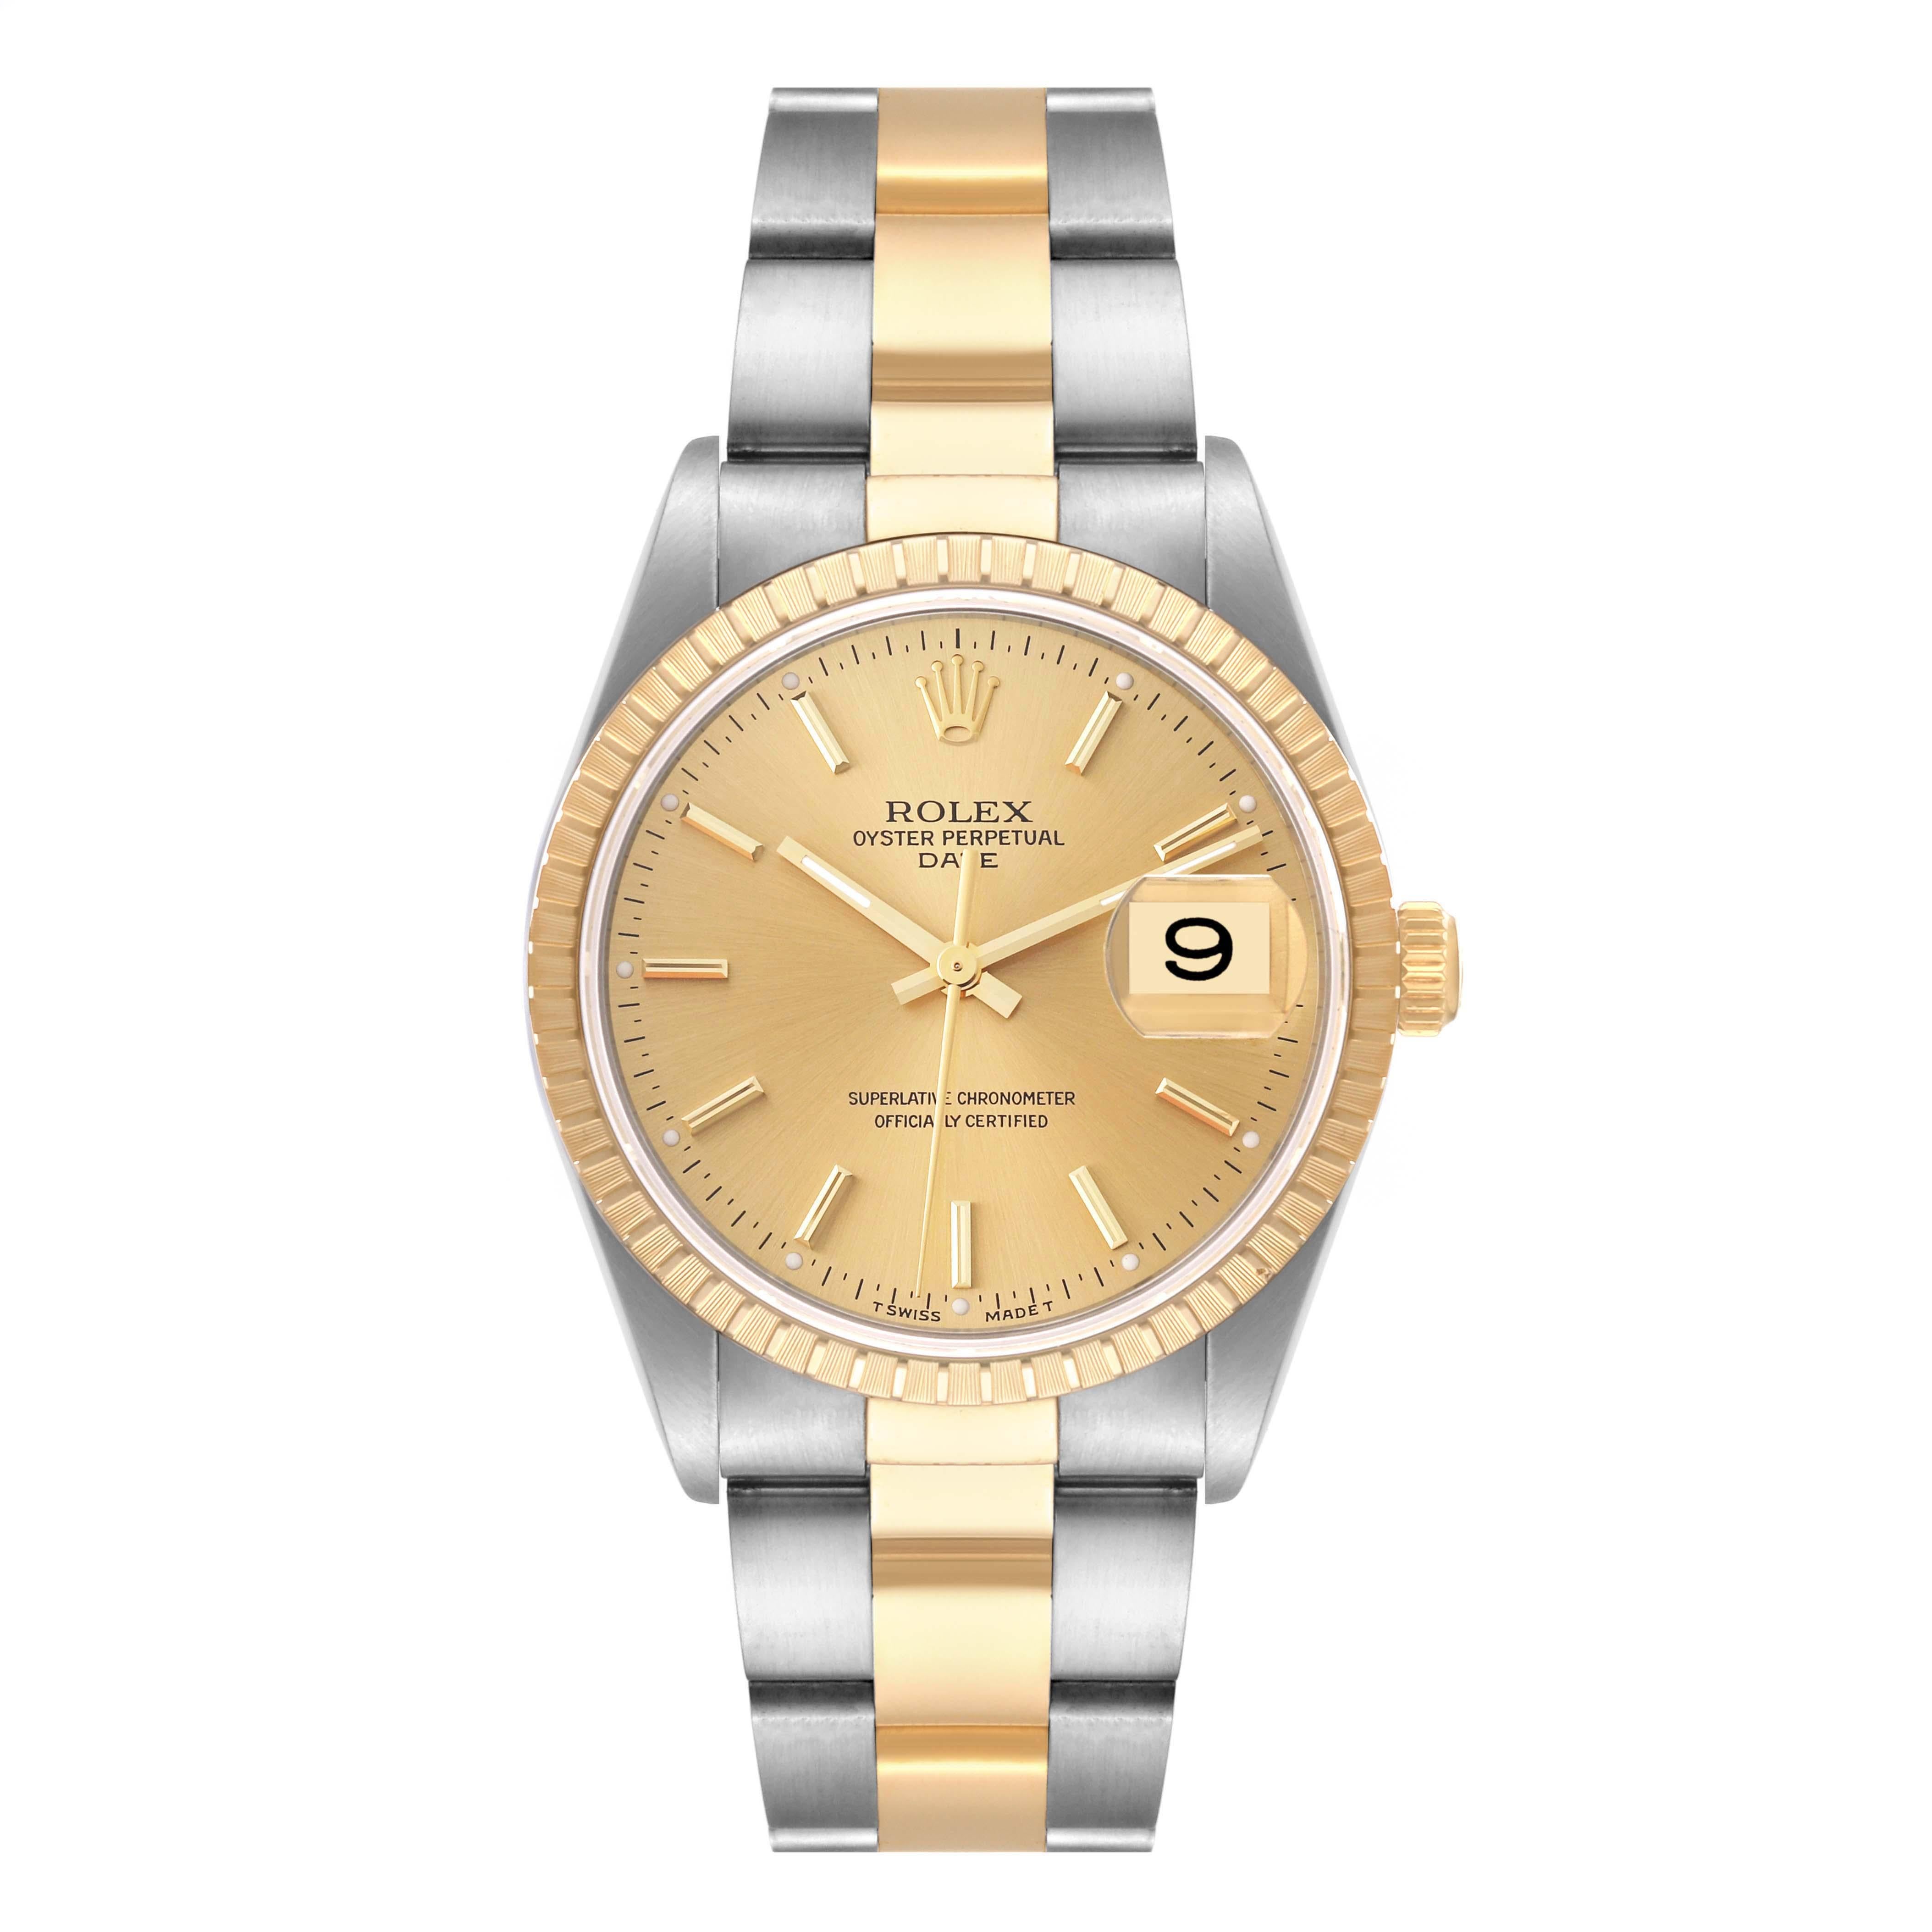 Rolex Date Steel Yellow Gold Engine Turned Bezel Mens Watch 15223 Box Papers. Officially certified chronometer automatic self-winding movement. Stainless steel and 18K yellow gold oyster case 34.0 mm in diameter. Rolex logo on the crown. 18K yellow